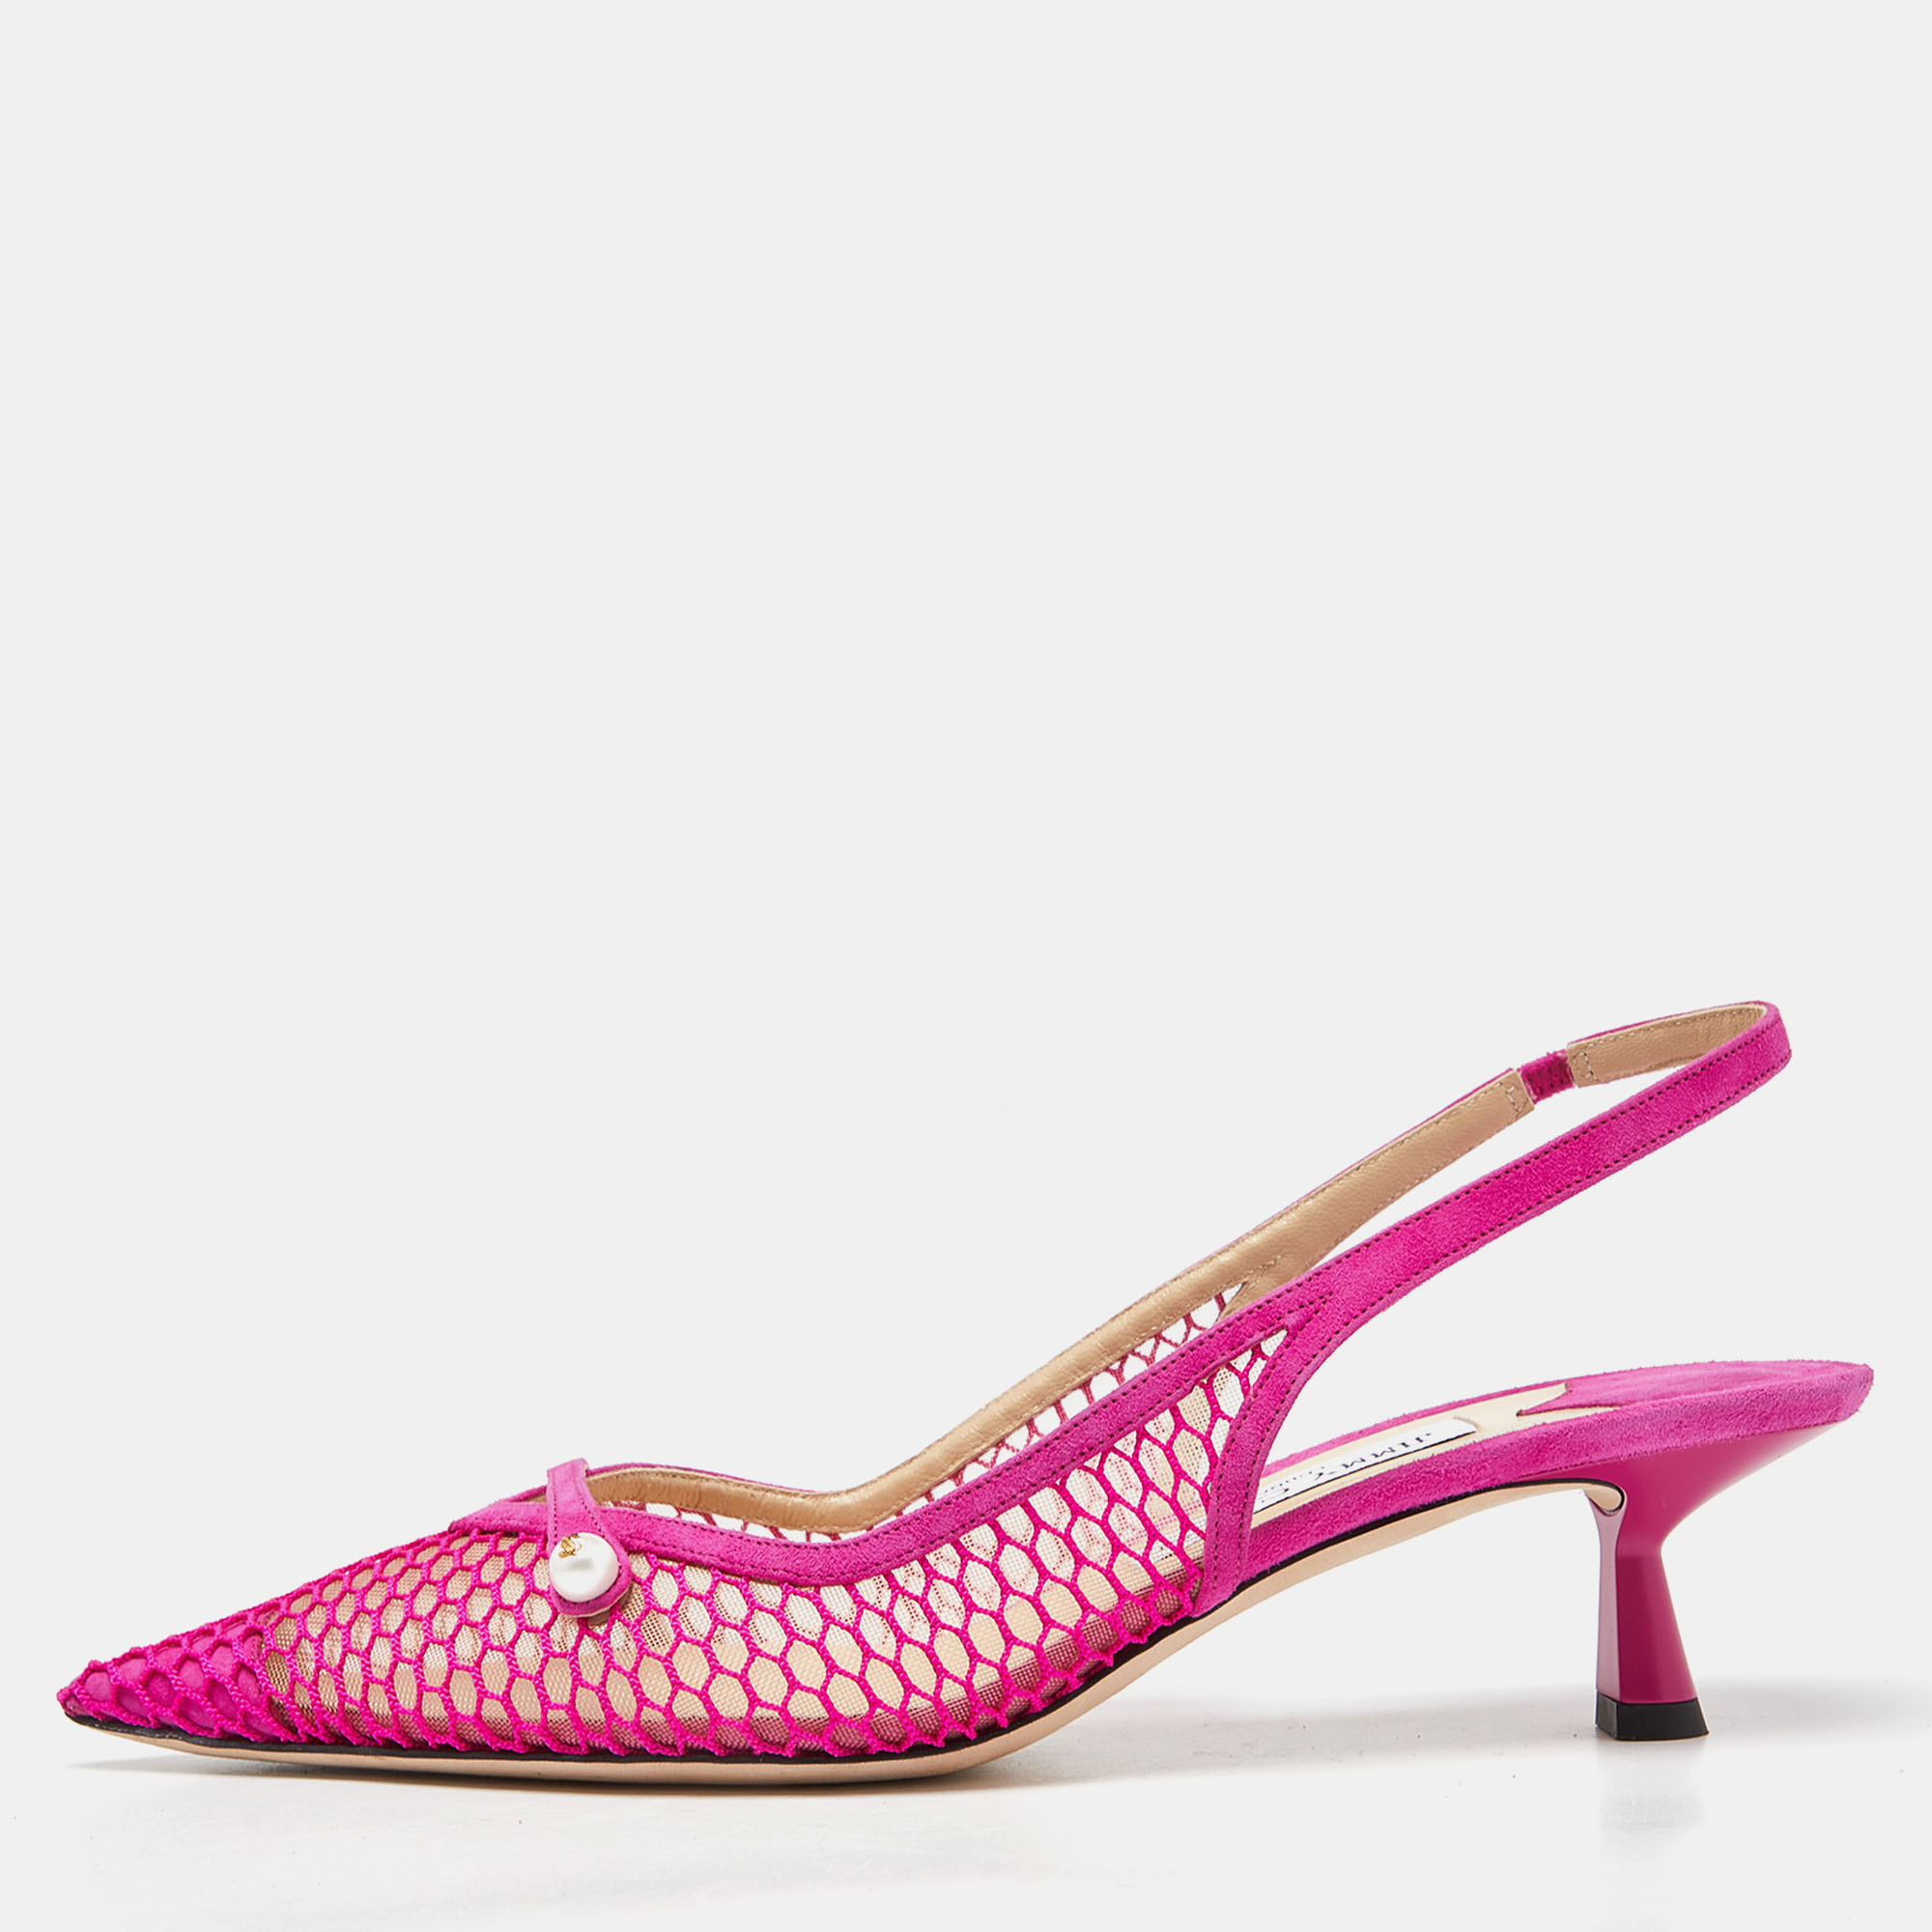 Jimmy choo pink mesh and suede slingback pumps size 40